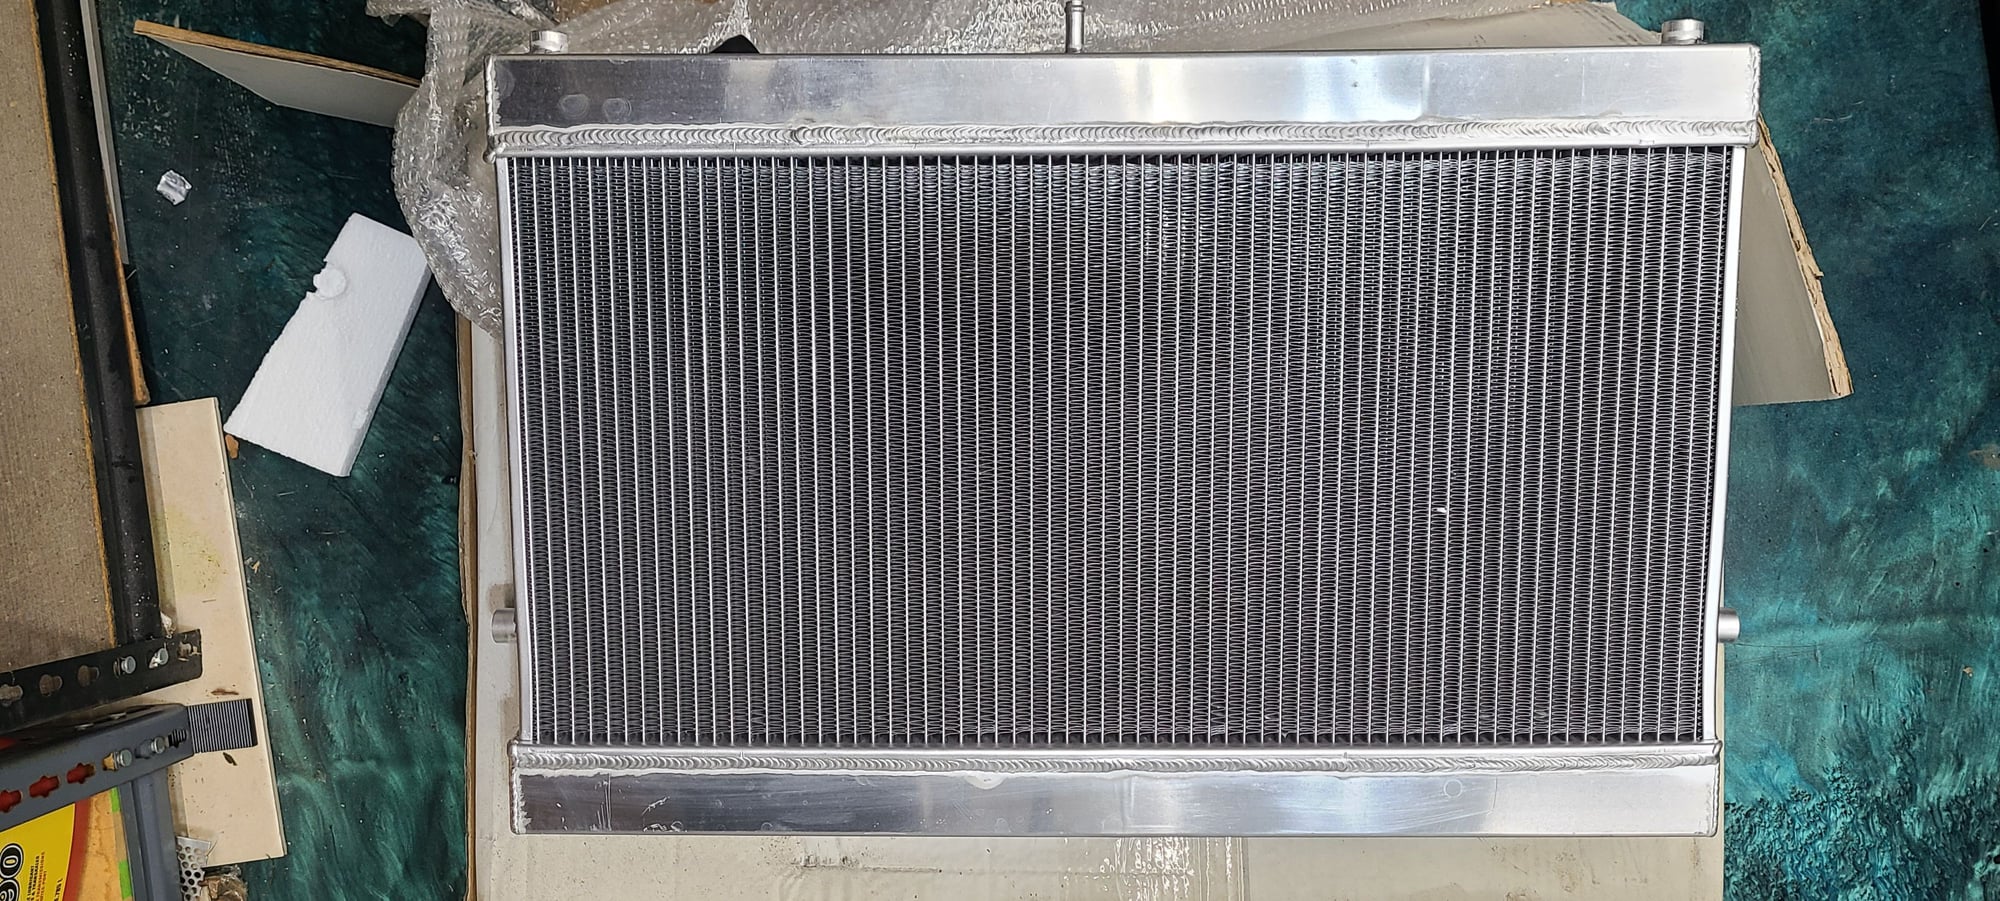 Miscellaneous - M2 Medium IC, Duct and CX-Racing V-Mount Radiator (new in box) - Used - 1993 to 2001 Mazda RX-7 - El Sobrante, CA 94803, United States